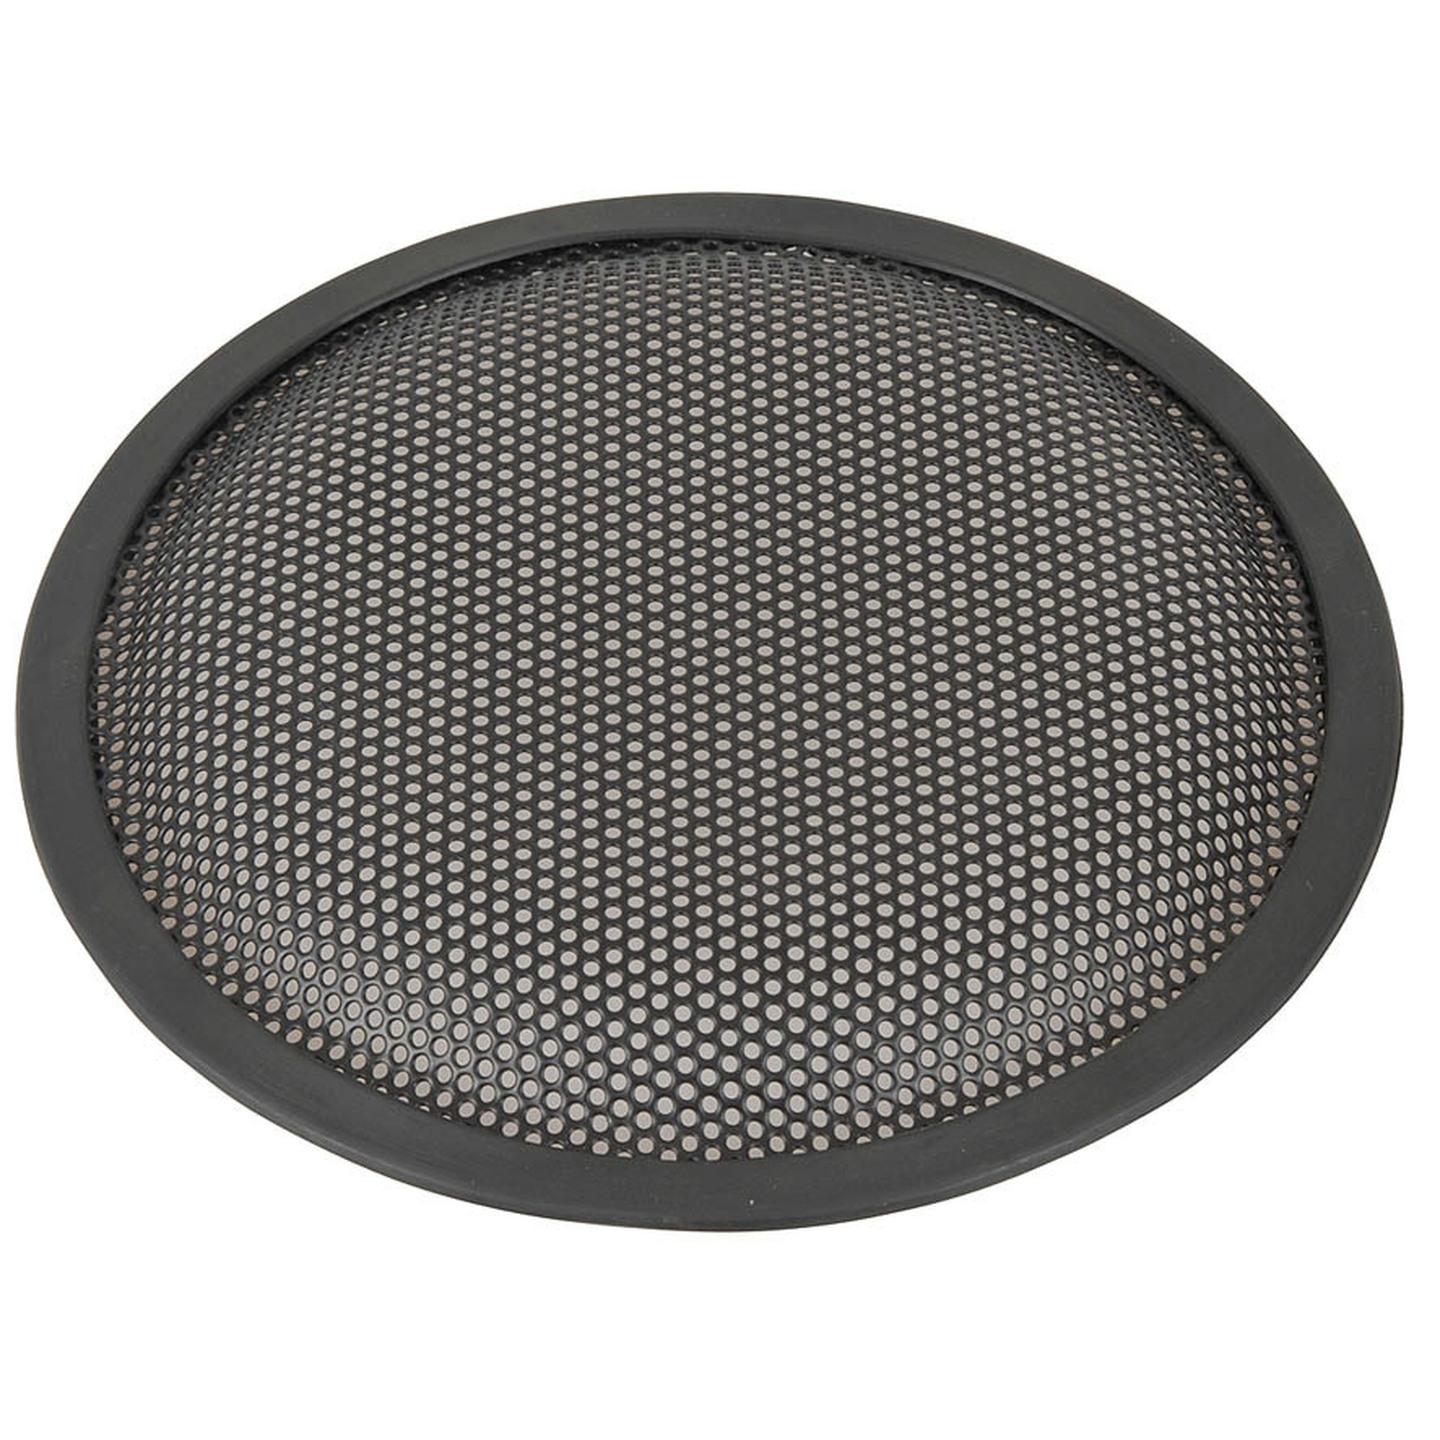 6.5 Speaker Protection Grille with Clips